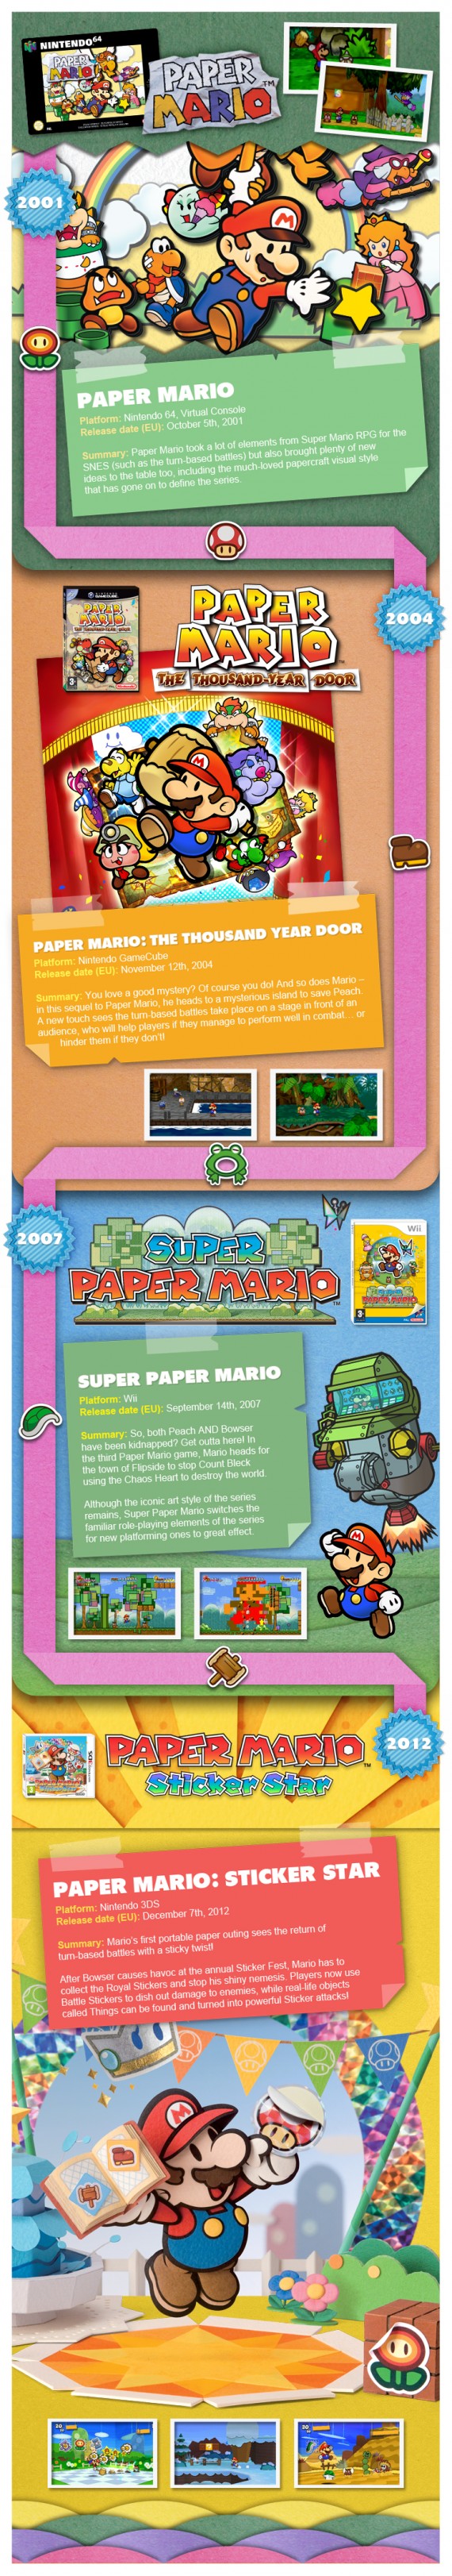 Infographic for Paper Mario